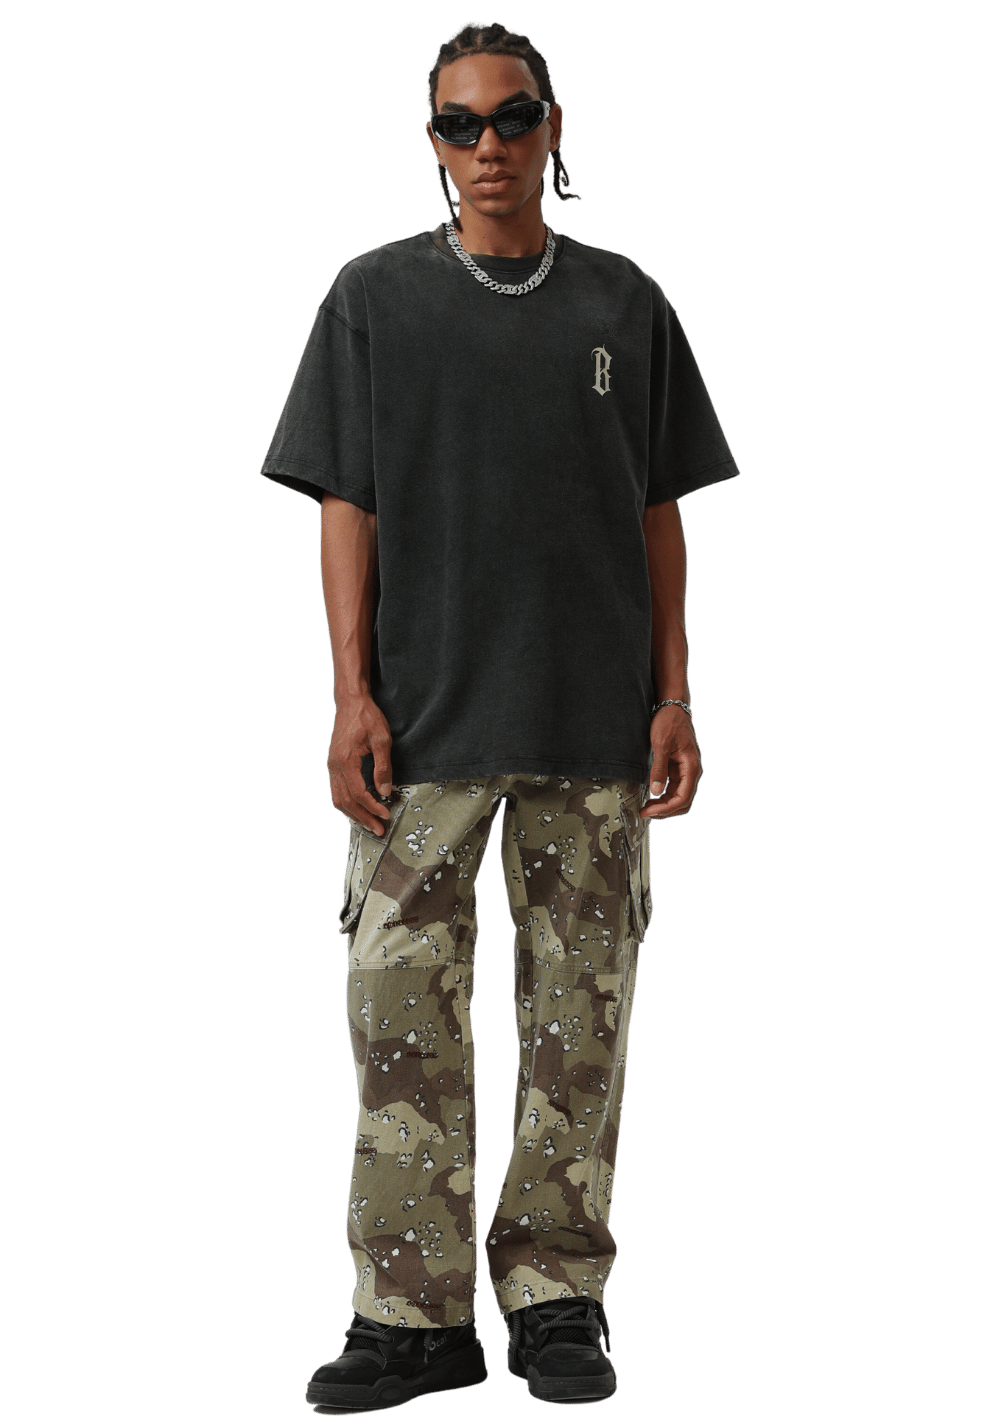 Camouflage Embroidered Work Pants - PSYLOS 1, Camouflage Embroidered Work Pants, Pants, Boneless, PSYLOS 1